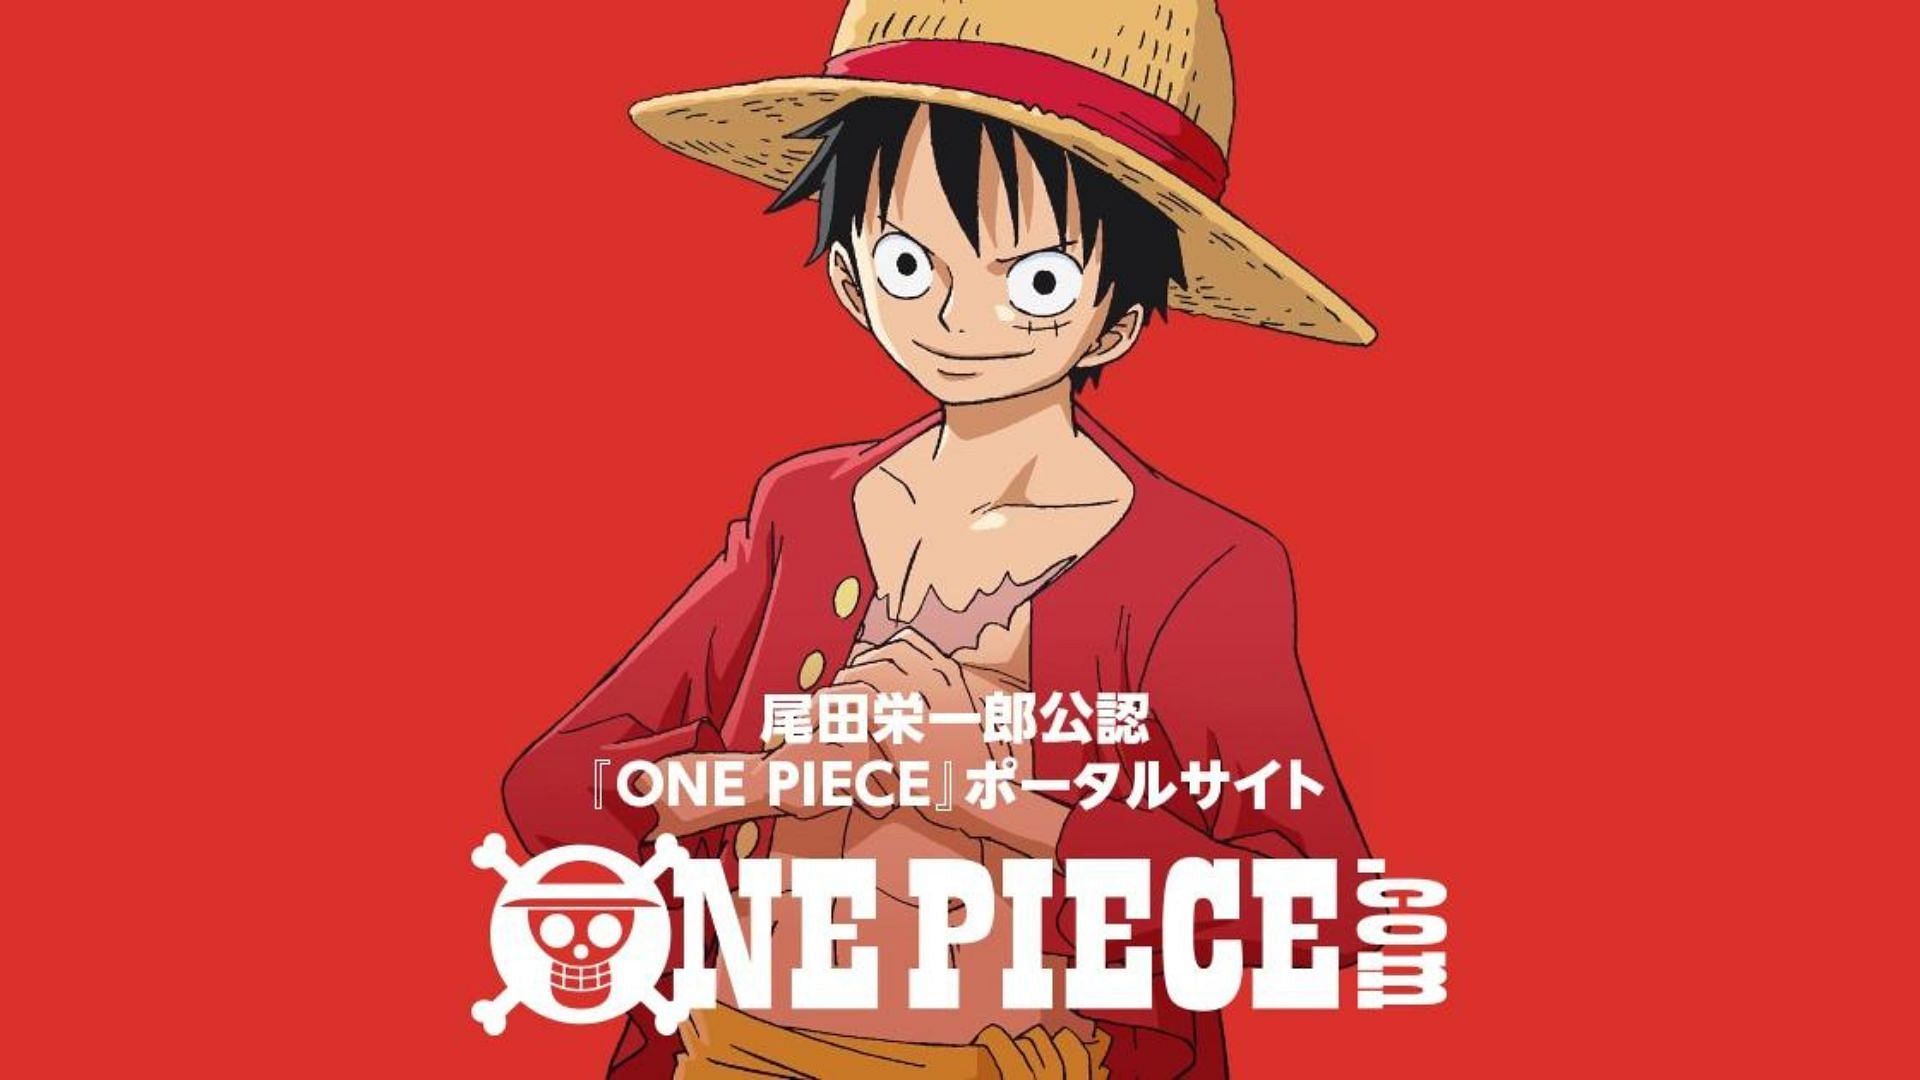 Featured image of Luffy (Image via One Piece)